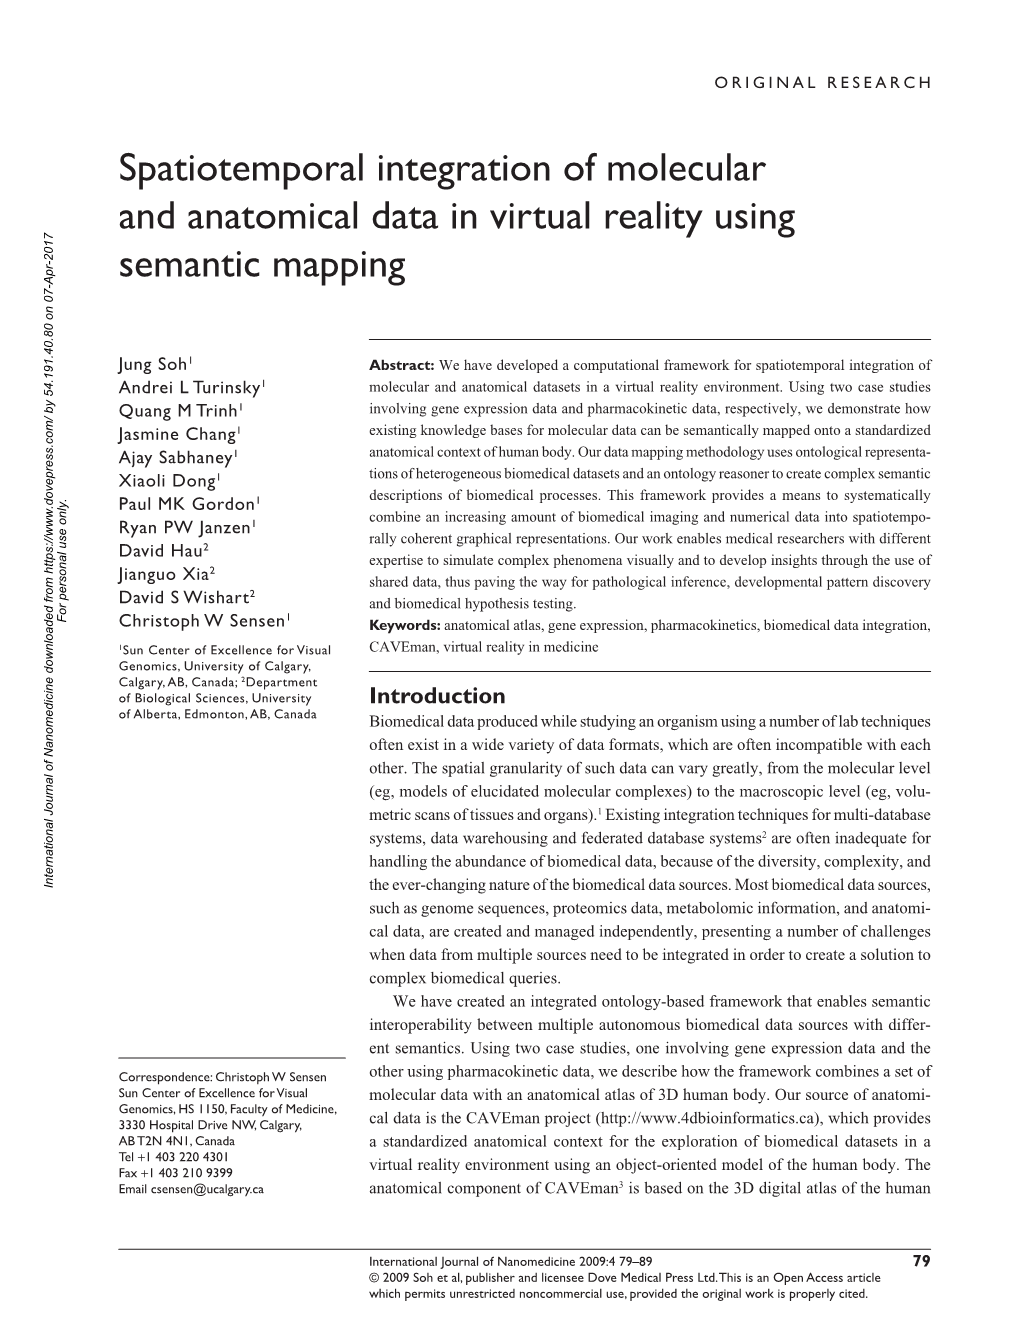 Spatiotemporal Integration of Molecular and Anatomical Data in Virtual Reality Using Semantic Mapping